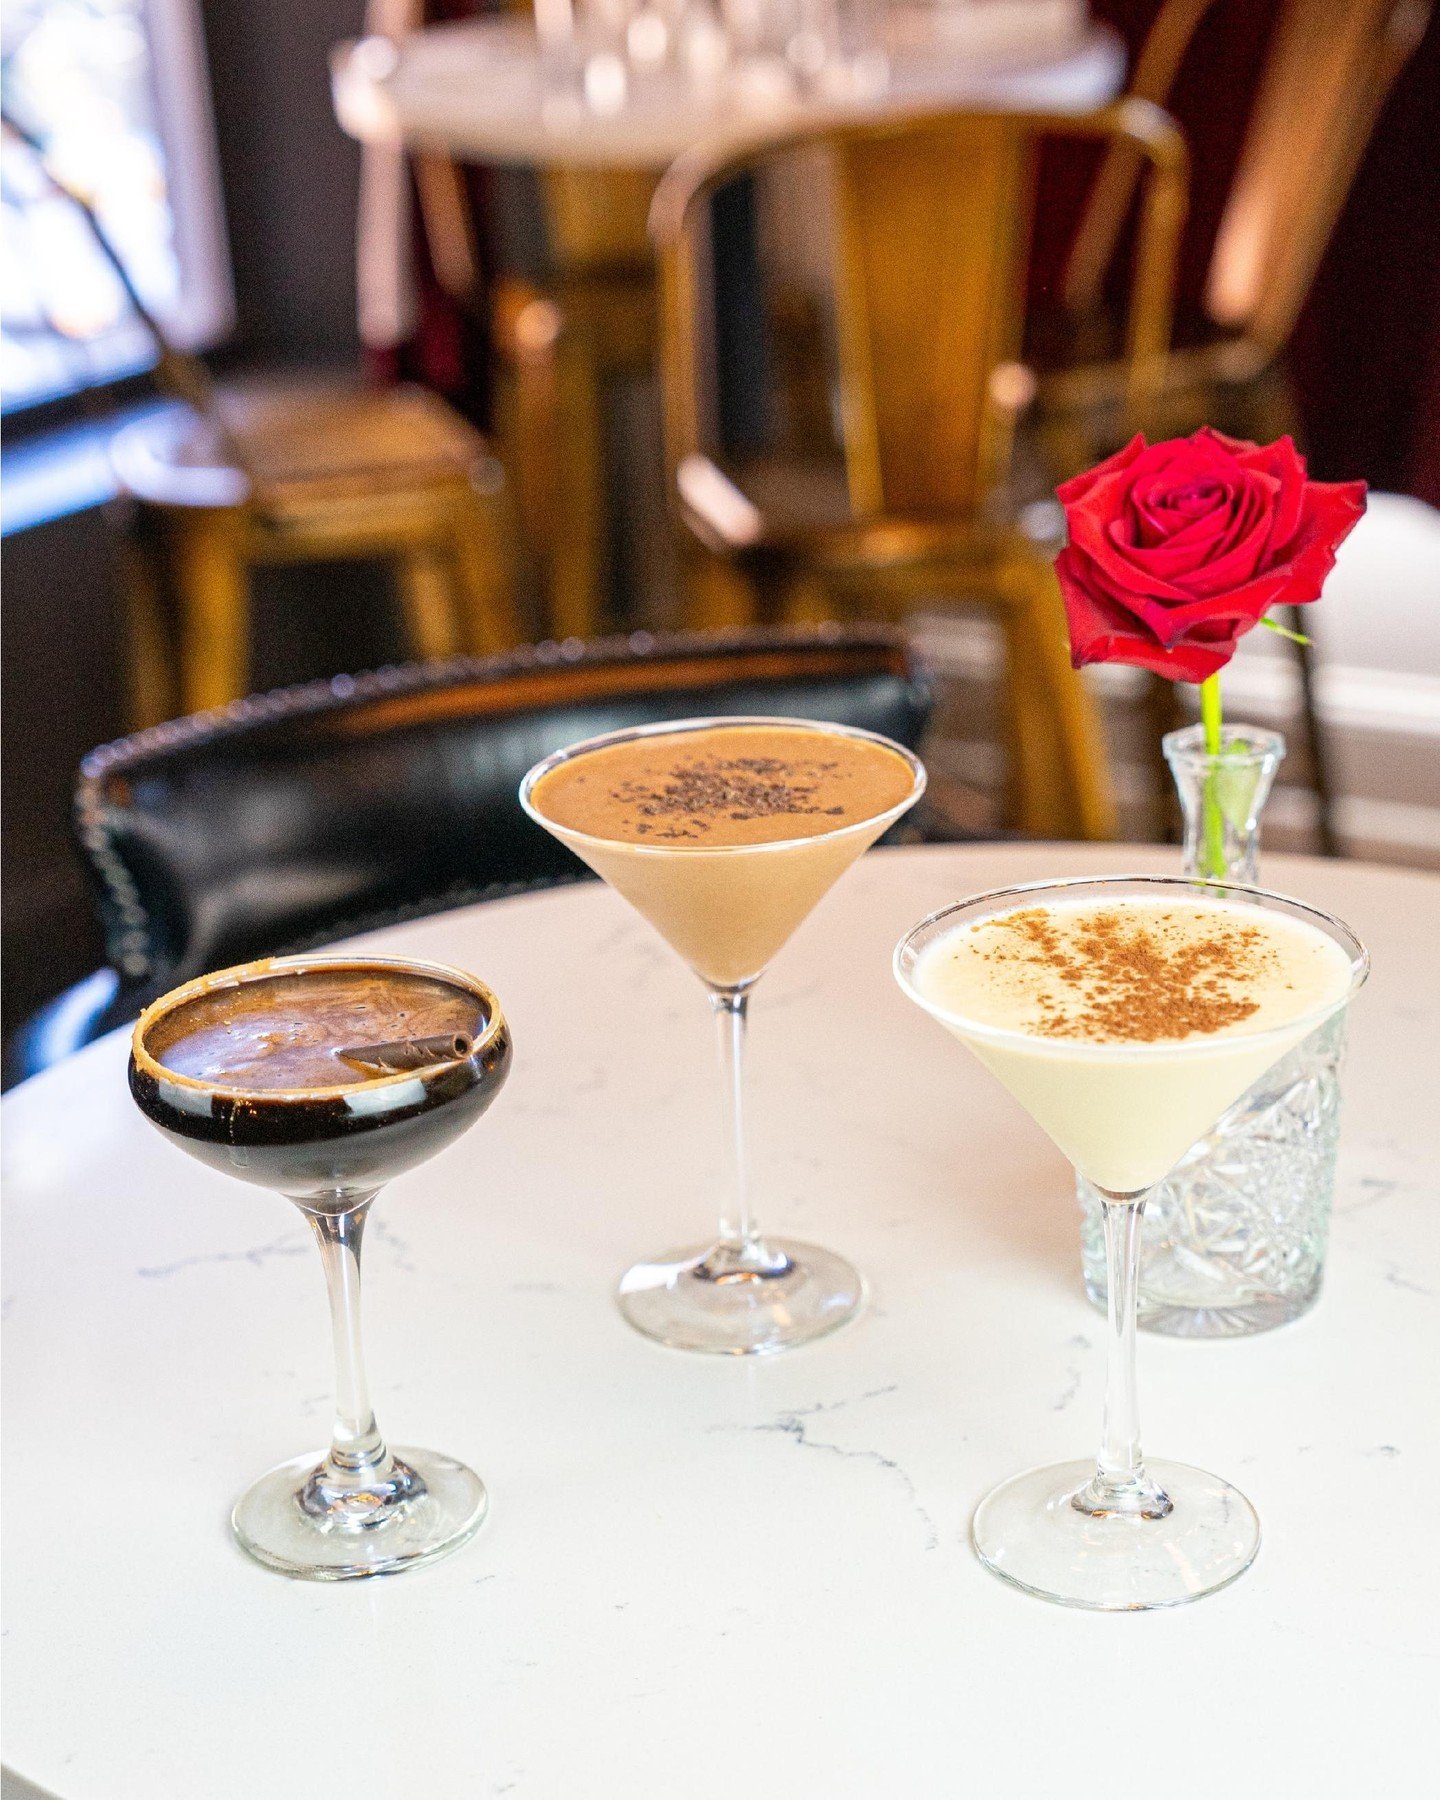 Cheers to the weekend!🍸

Stop in this weekend for the most romantic date night spot for the best shareables, desserts, and martinis!🤩

Open from 5pm-11pm